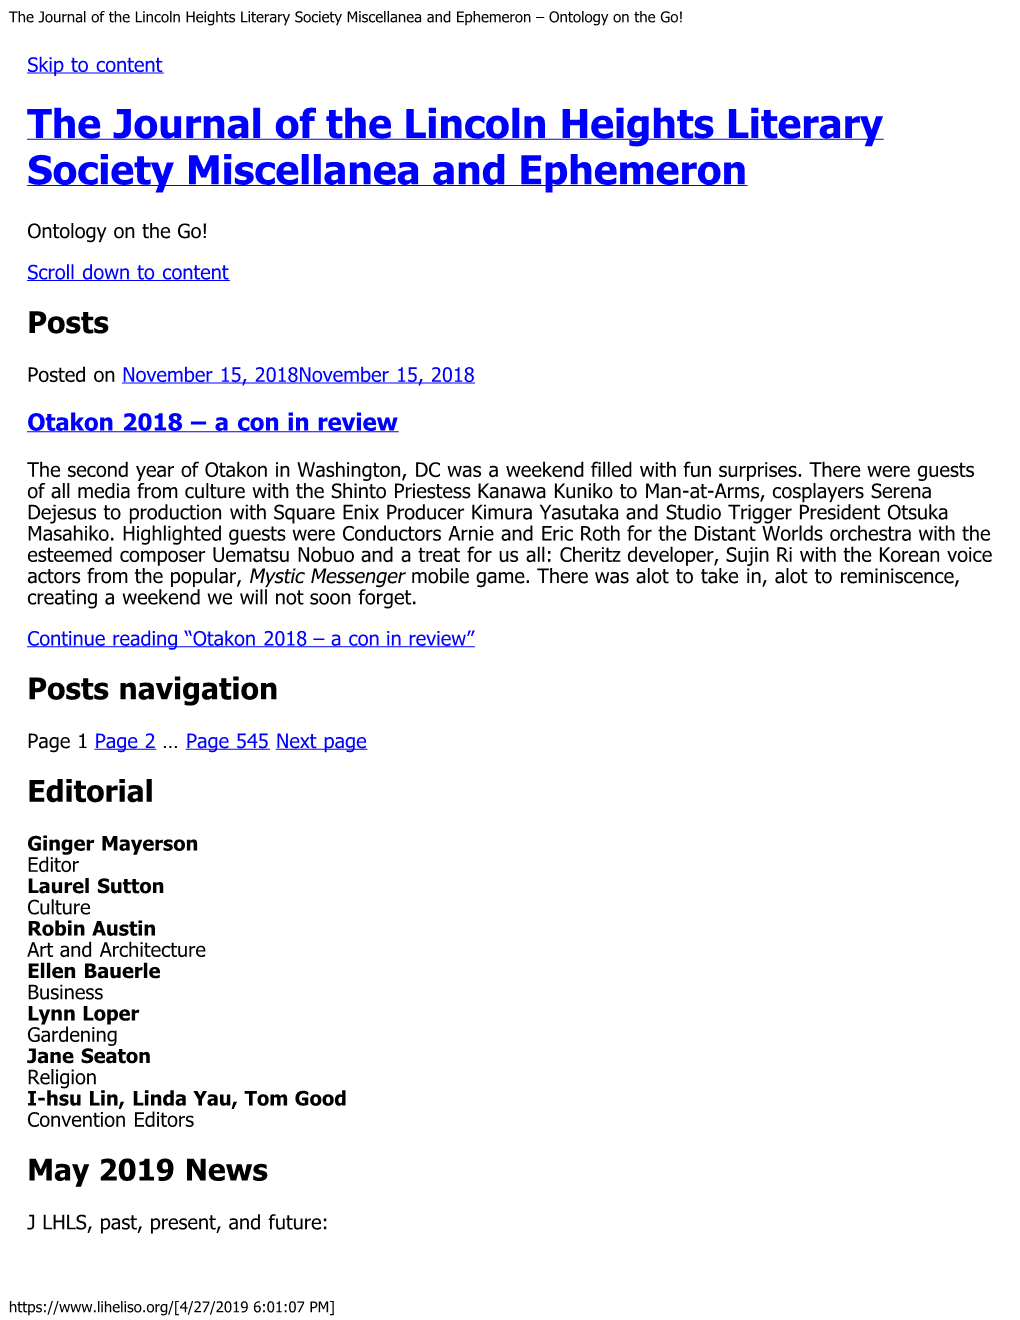 The Journal of the Lincoln Heights Literary Society Miscellanea and Ephemeron – Ontology on the Go!